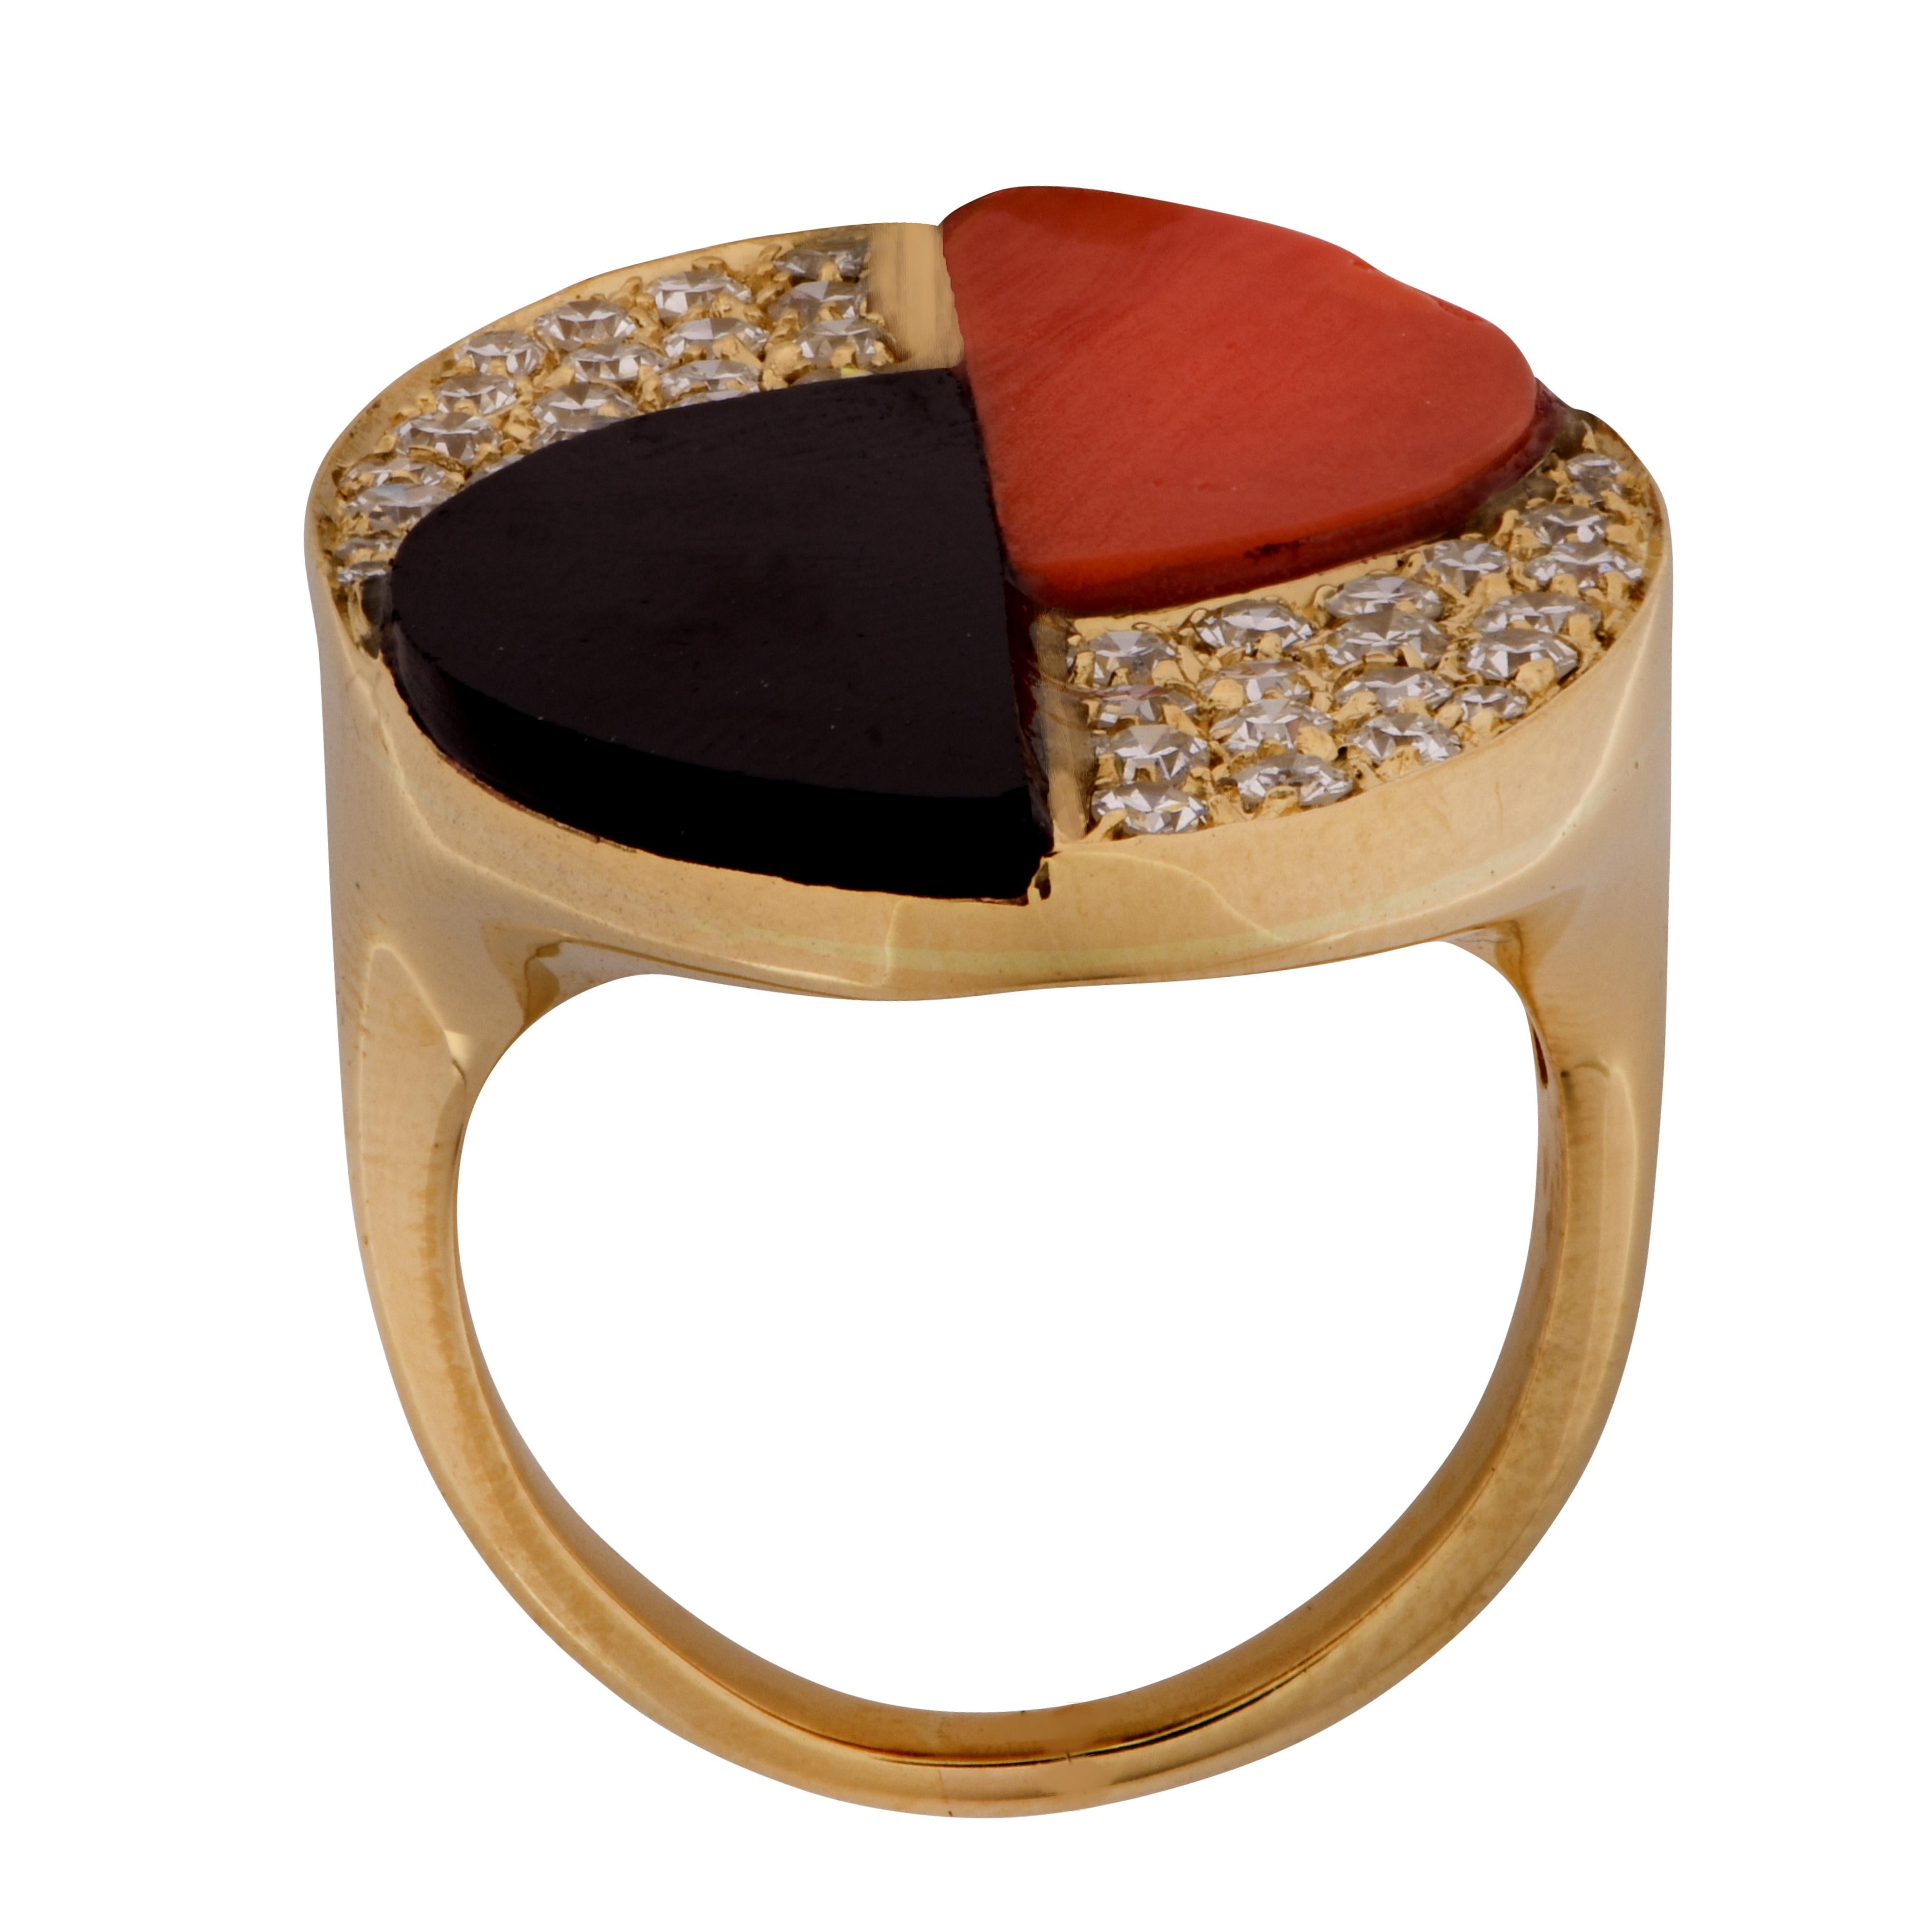 Sensational Modernist ring crafted in 18 karat yellow gold, featuring coral and onyx semi-circular discs accented by 40 single cut diamonds weighing approximately 1 carat, G color, VS clarity, set in an oval design. The face of the ring measures